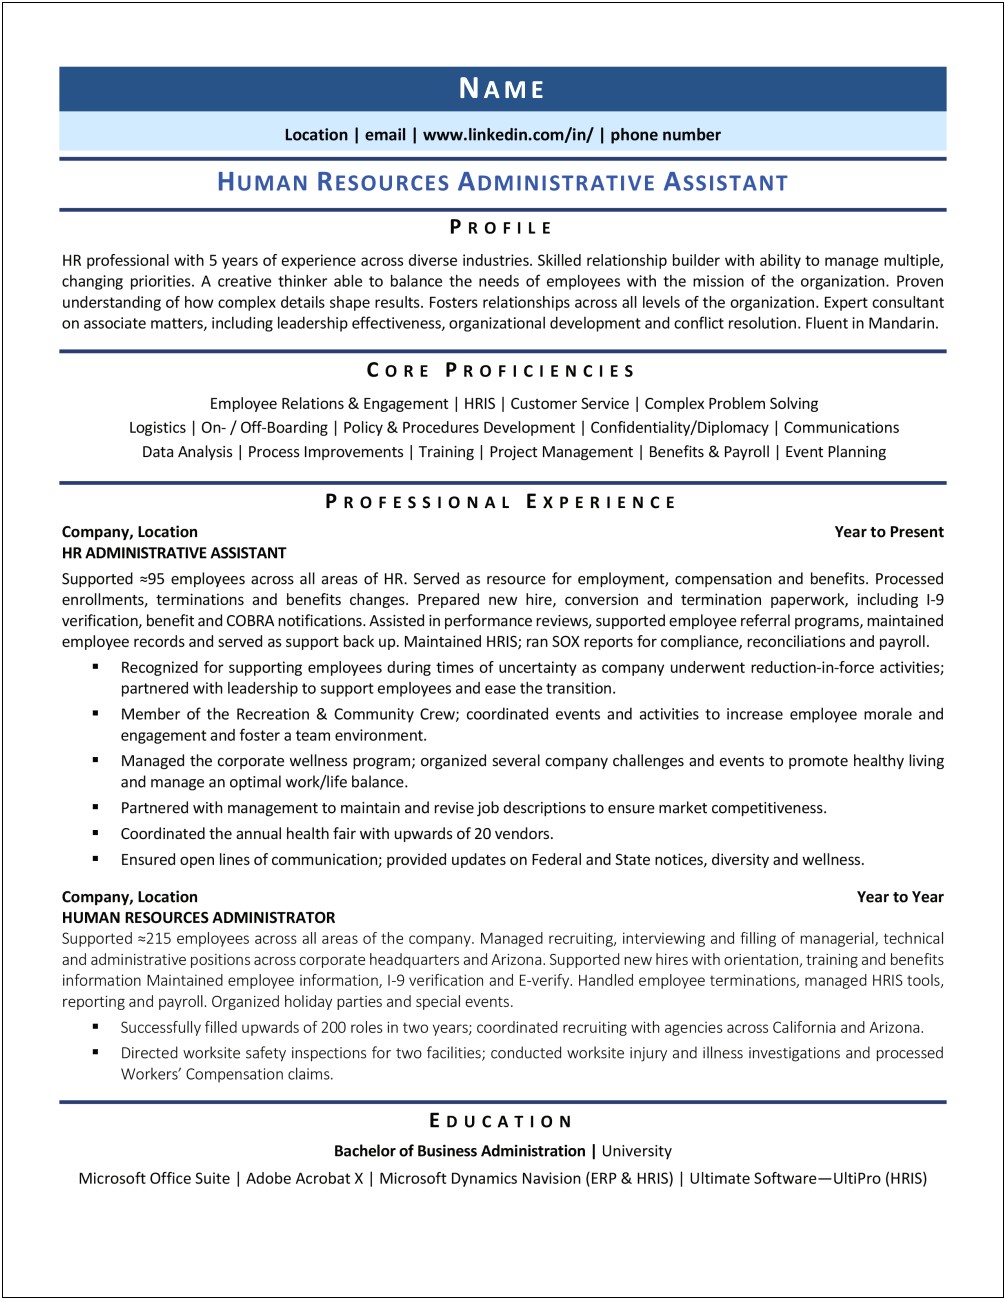 Sample Resume Administrative Assistant Human Resources